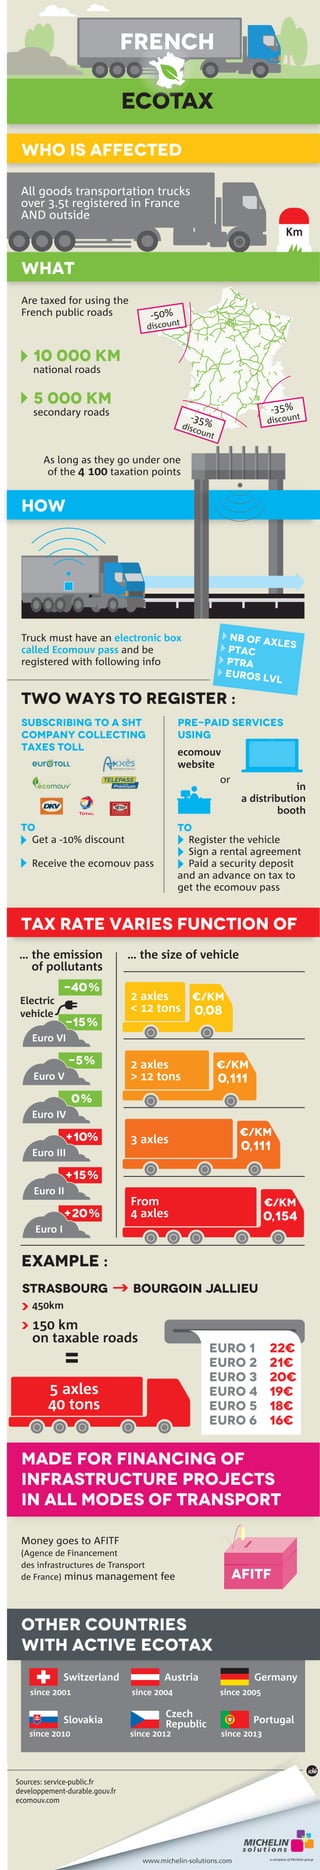 WHO is affected 
All goods transportation trucks 
over 3.5t registered in France 
AND outside 
WHAT 
HOW 
-50% 
discount 
Get a -10% discount 
Receive the ecomouv pass 
Tax rate varies function of 
-40 % 
-15 % 
Euro VI 
Euro V 
Euro IV 
-5 % 
0 % 
+10% 
Euro III 
Euro II 
+15 % 
= 
made for FINANCING OF 
INFRASTRUCTURE PROJECTS 
IN ALL MODES OF TRANSPORT 
Switzerland Germany 
Sources: service-public.fr 
developpement-durable.gouv.fr 
ecomouv.com 
FRENCH 
ECOTAX 
Are taxed for using the 
French public roads 
Truck must have an electronic box 
called Ecomouv pass and be 
registered with following info 
… the size of vehicle 
€/KM 
3 axles 0,111 
€/KM 
0,154 
From 
4 axles 
€/KM 
0,111 
2 axles 
> 12 tons 
€/km 
0,08 
2 axles 
< 12 tons 
… the emission 
of pollutants 
Euro I 
+20 % 
Electric 
vehicle 
Km 
strasbourg bourgoin jallieu 
Austria 
since 2004 since 2005 
Czech 
Republic 
since 2001 
Slovakia 
since 2010 since 2012 since 2013 
-35% 
discount 
-35% 
discount 
10 000 km 
national roads 
5 000 km 
secondary roads 
As long as they go under one 
of the 4 100 taxation points 
Two ways to register : 
SUBSCRIBING TO A SHT 
company collecting 
taxes toll 
Pre-paid services 
using 
ecomouv 
website 
or 
in 
a distribution 
booth 
to 
Register the vehicle 
Sign a rental agreement 
Paid a security deposit 
and an advance on tax to 
get the ecomouv pass 
example : 
euro 1 
euro 2 
euro 3 
euro 4 
euro 5 
euro 6 
22€ 
21€ 
20€ 
19€ 
18€ 
16€ 
450km 
150 km 
on taxable roads 
AFITF 
Money goes to AFITF 
(Agence de Financement 
des infrastructures de Transport 
de France) minus management fee 
other countries 
with active ecotax 
Nb of axles 
PTAC 
PTRa 
Euros lvl 
to 
5 axles 
40 tons 
Portugal 
www.michelin-solutions.com 
